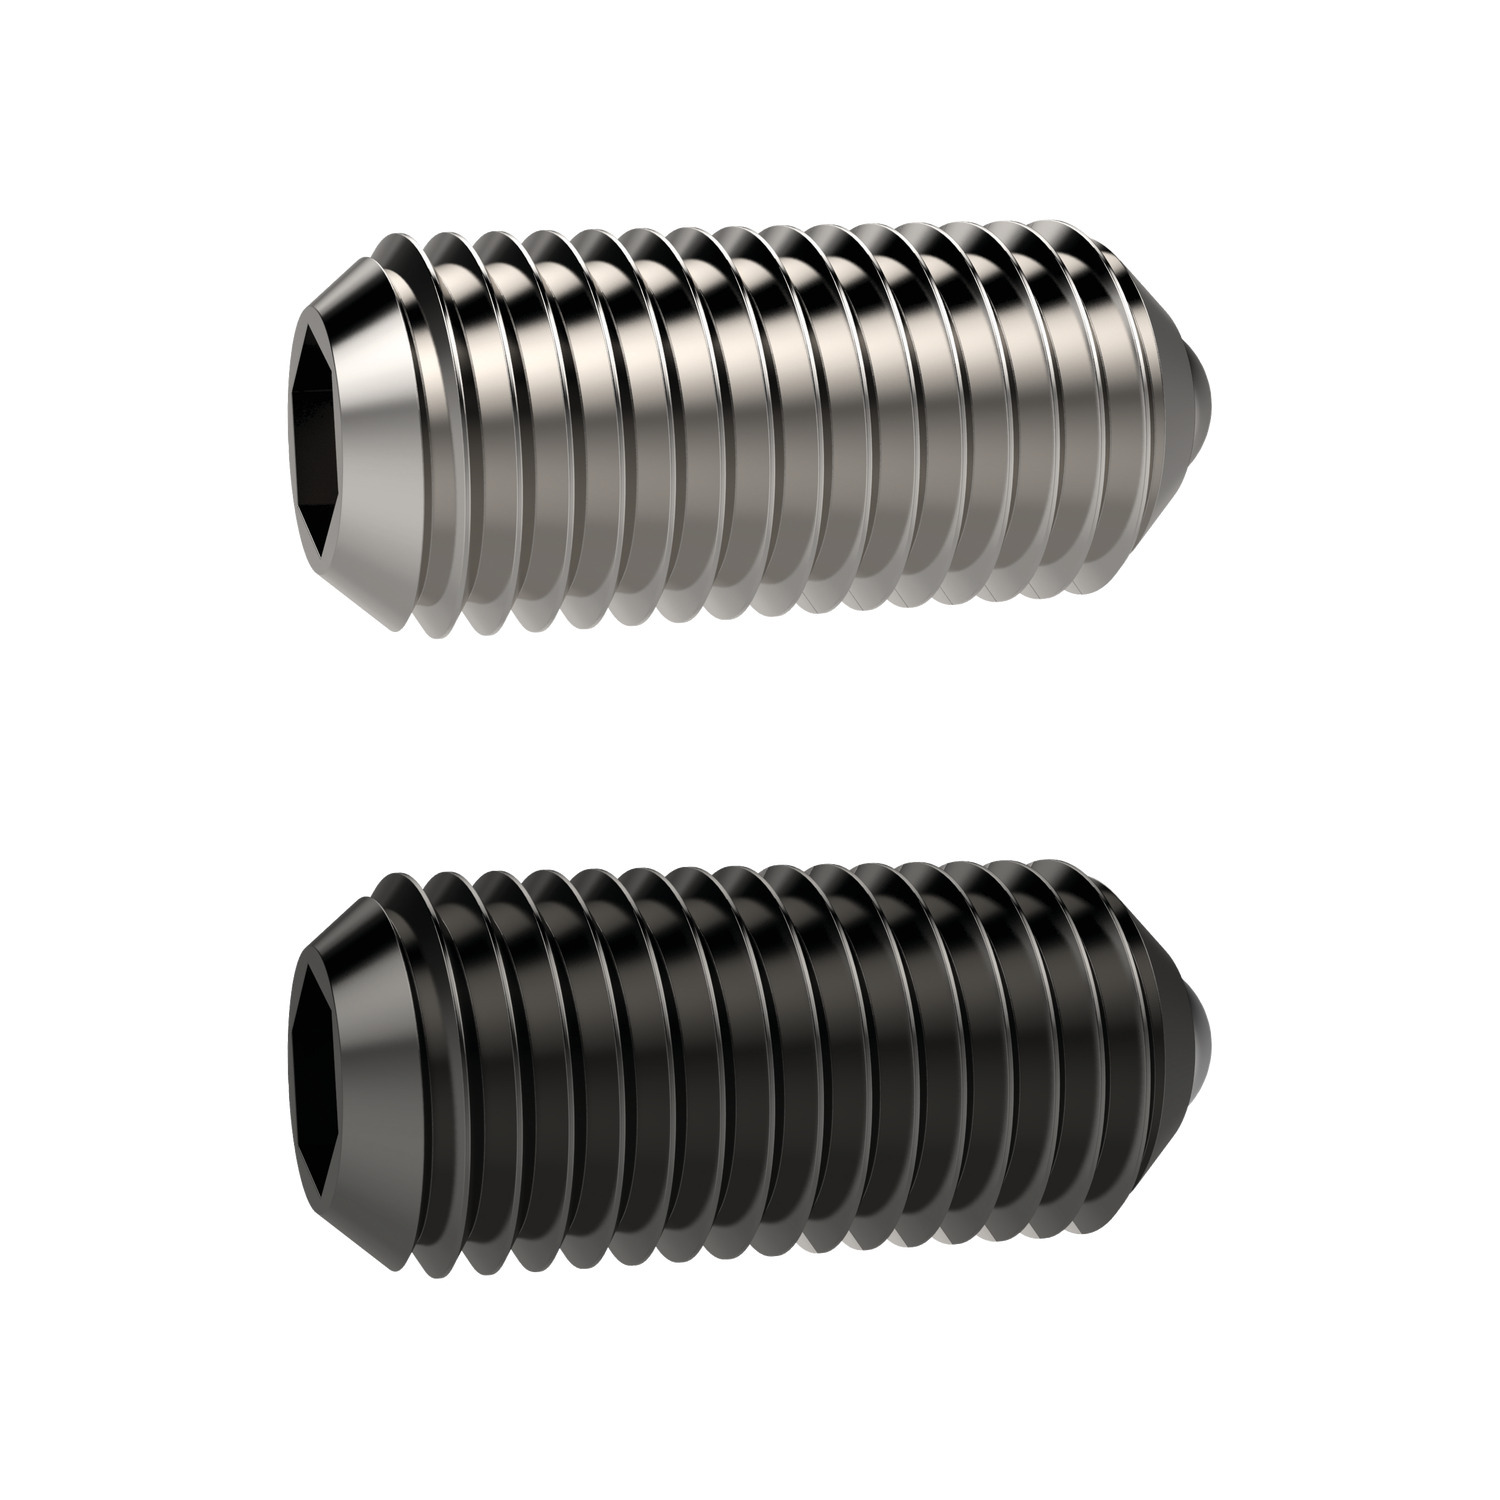 31610.W0208 Spring Plungers- Moveable Ball- S/S M8 x 18 - Stainless Steel - Standard Spring Load